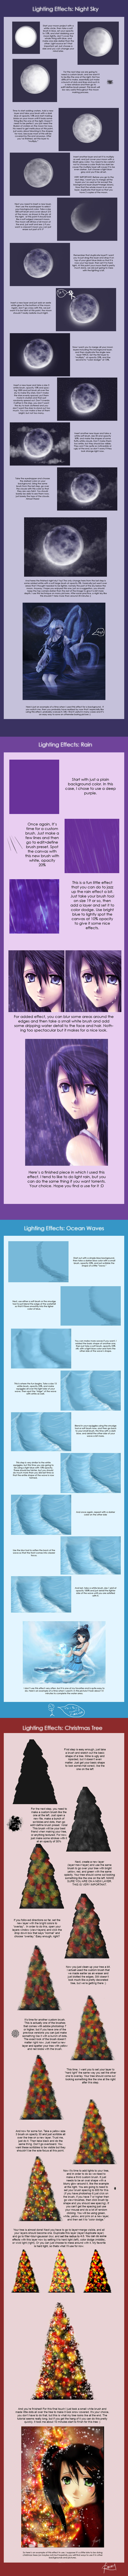 Background Lighting Effects